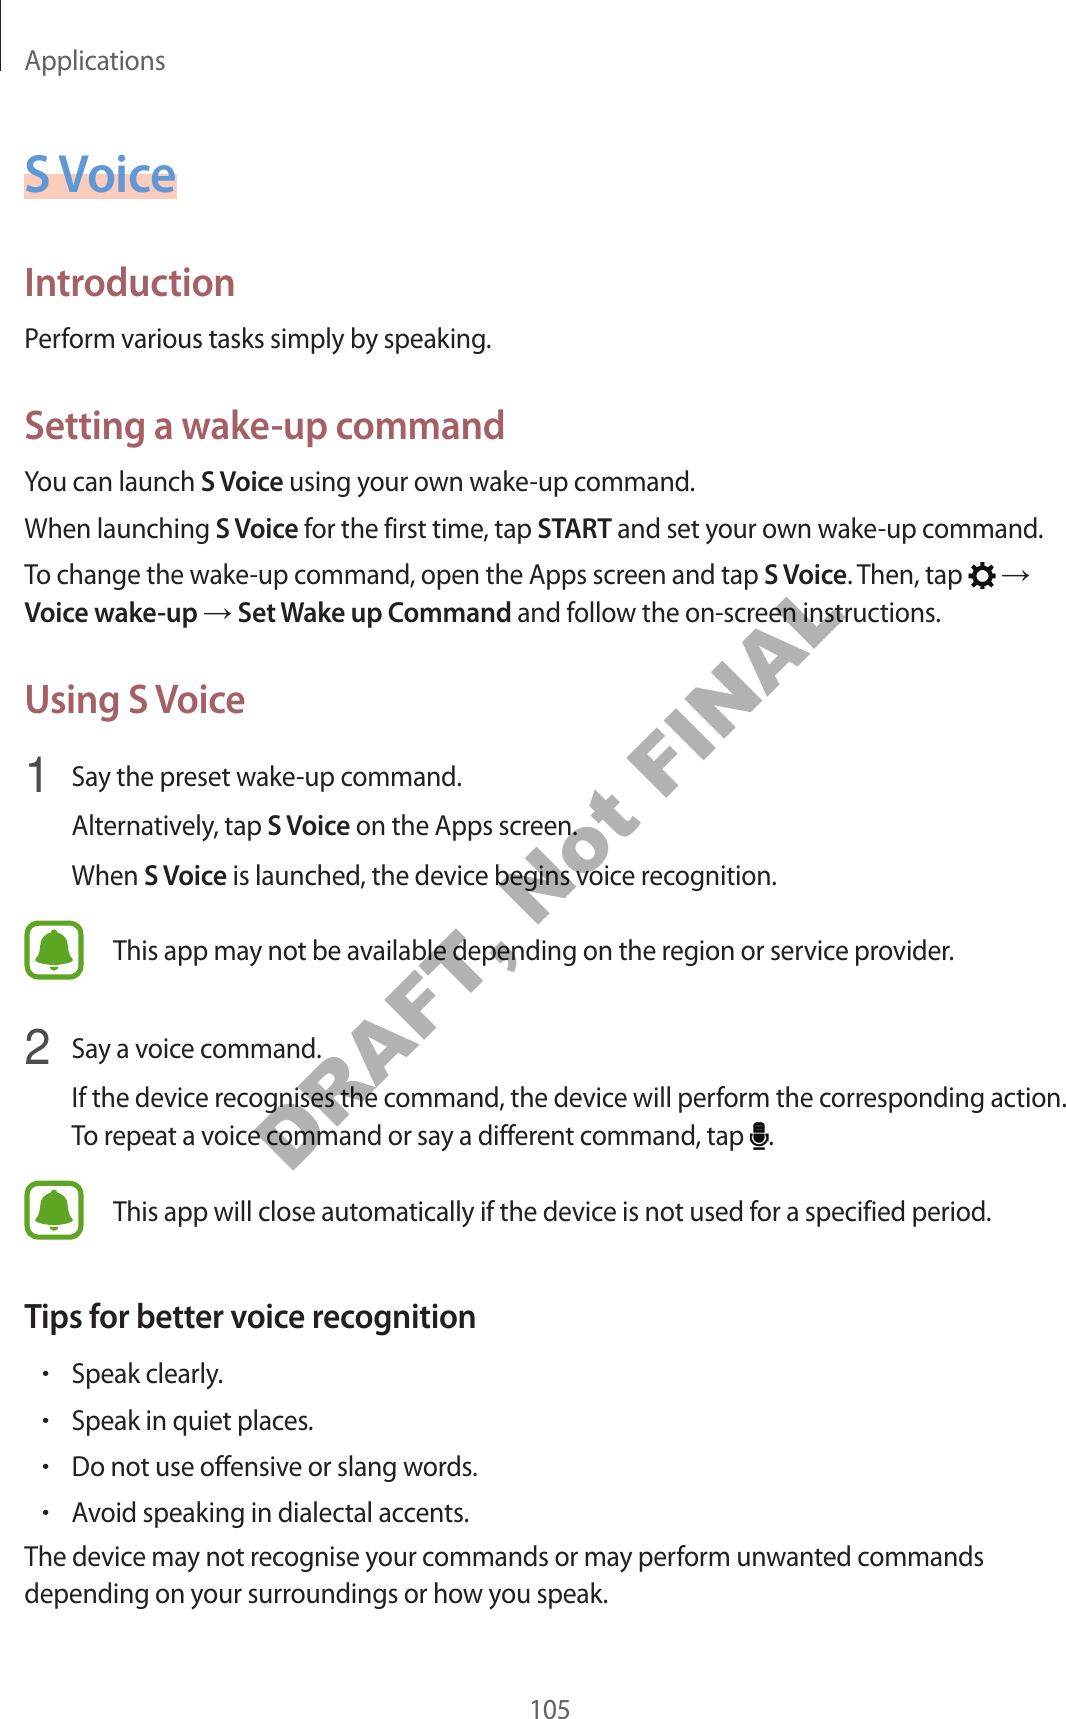 Applications105S VoiceIntroductionPerform various tasks simply by speaking.Setting a wake-up commandYou can launch S Voice using your own wake-up command.When launching S Voice for the first time, tap START and set your own wake-up command.To change the wake-up command, open the Apps screen and tap S Voice. Then, tap    Voice wake-up  Set Wake up Command and follow the on-screen instructions.Using S Voice1  Say the preset wake-up command.Alternatively, tap S Voice on the Apps screen.When S Voice is launched, the device begins voice recognition.This app may not be available depending on the region or service provider.2  Say a voice command.If the device recognises the command, the device will perform the corresponding action. To repeat a voice command or say a different command, tap  .This app will close automatically if the device is not used for a specified period.Tips for better voice recognition•Speak clearly.•Speak in quiet places.•Do not use offensive or slang words.•Avoid speaking in dialectal accents.The device may not recognise your commands or may perform unwanted commands depending on your surroundings or how you speak.DRAFT, Not FINAL